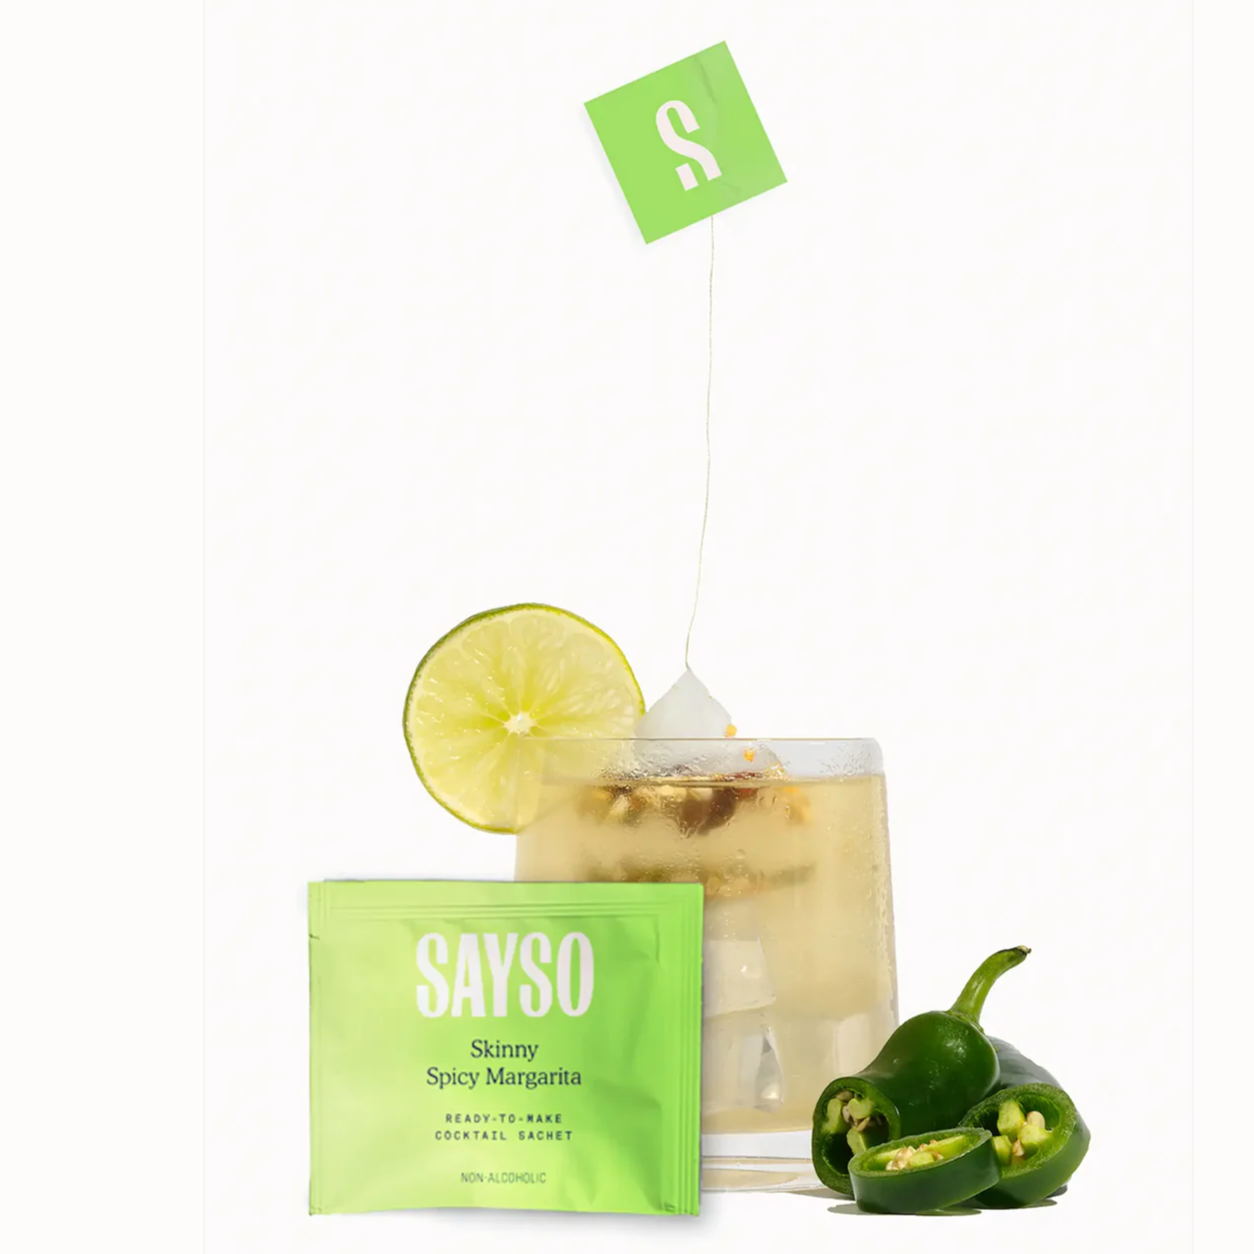 Image shows the SAYSO Skinny Spicy Margarita sachet, a cocktail with the sachet soaking, and sliced jalepeno. 